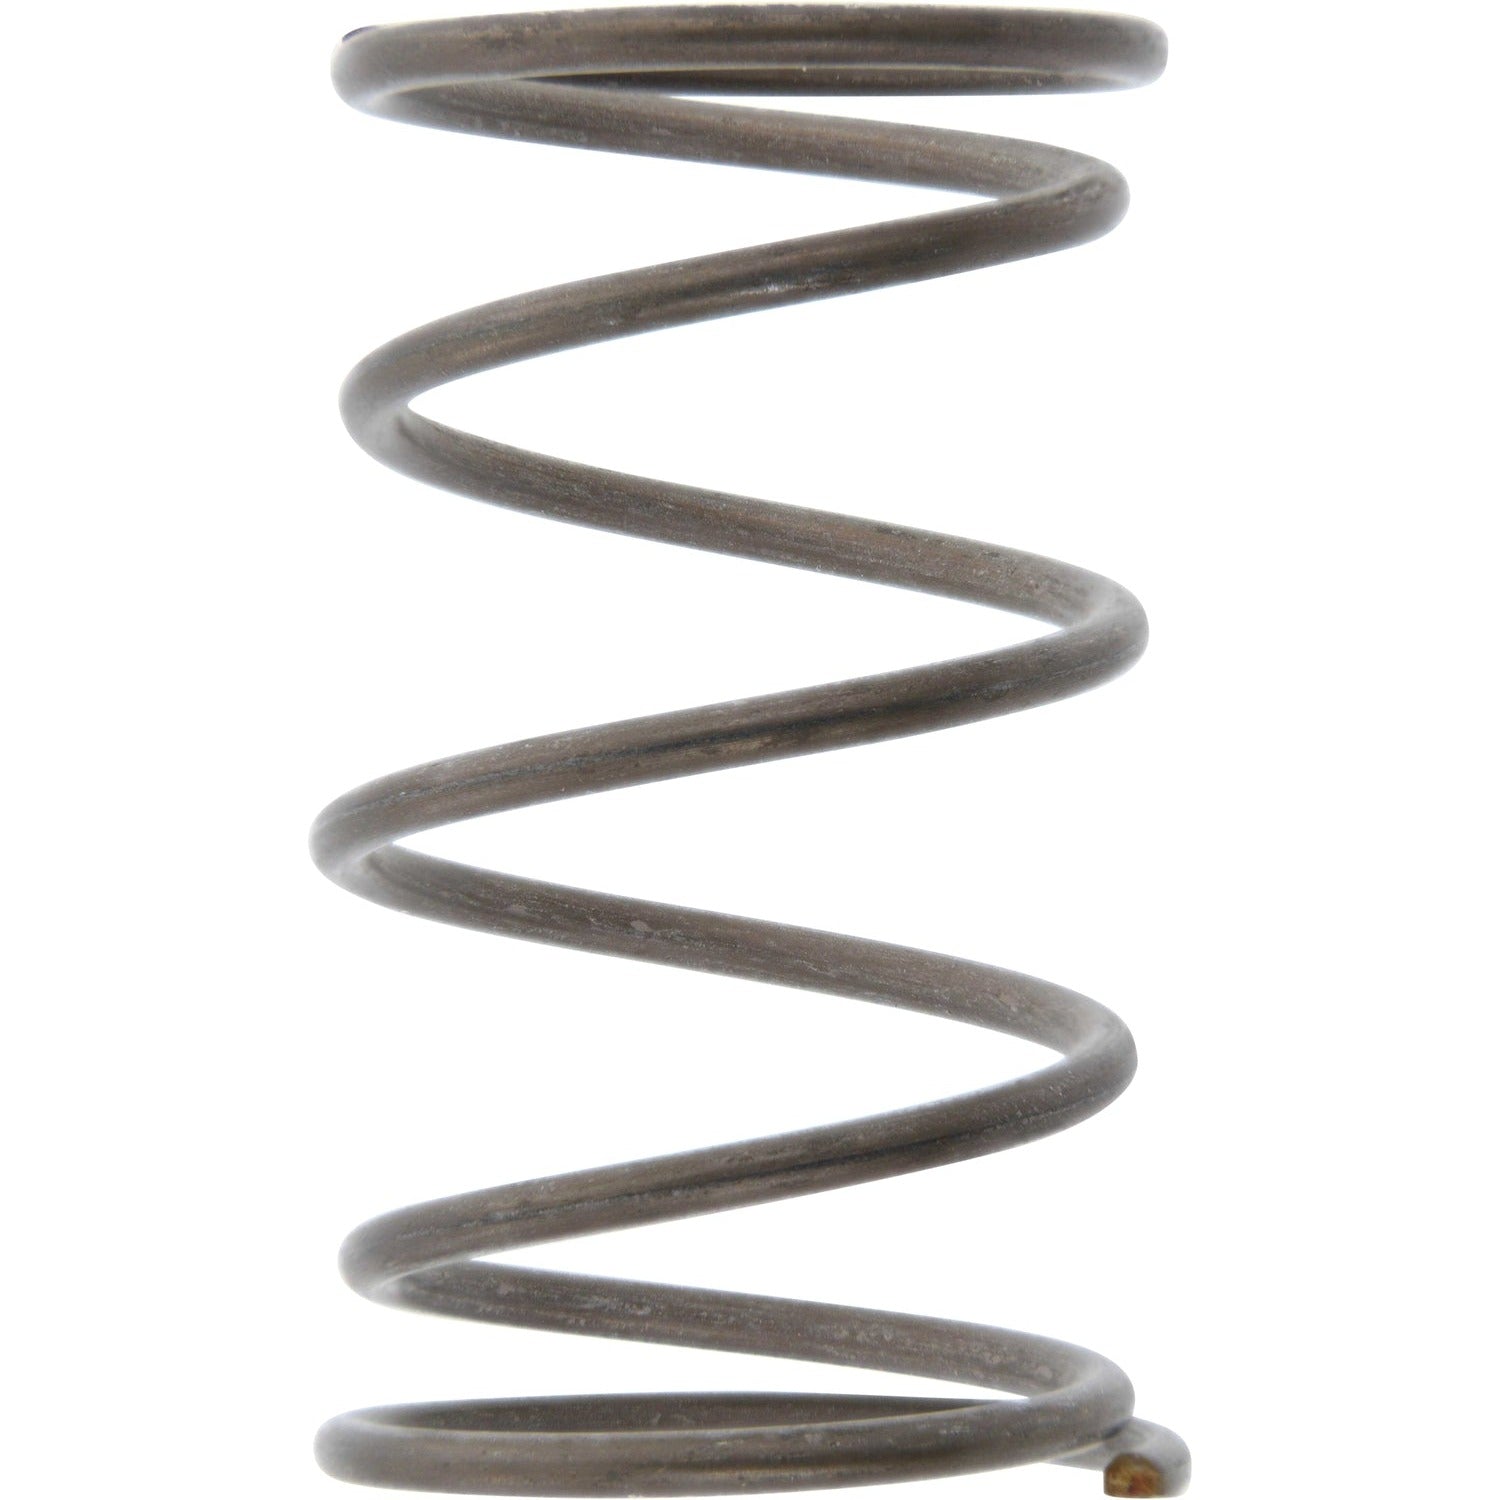 Steel Compression Spring standing on its end, shown on a white background: CQ2A25-C09DUW01835